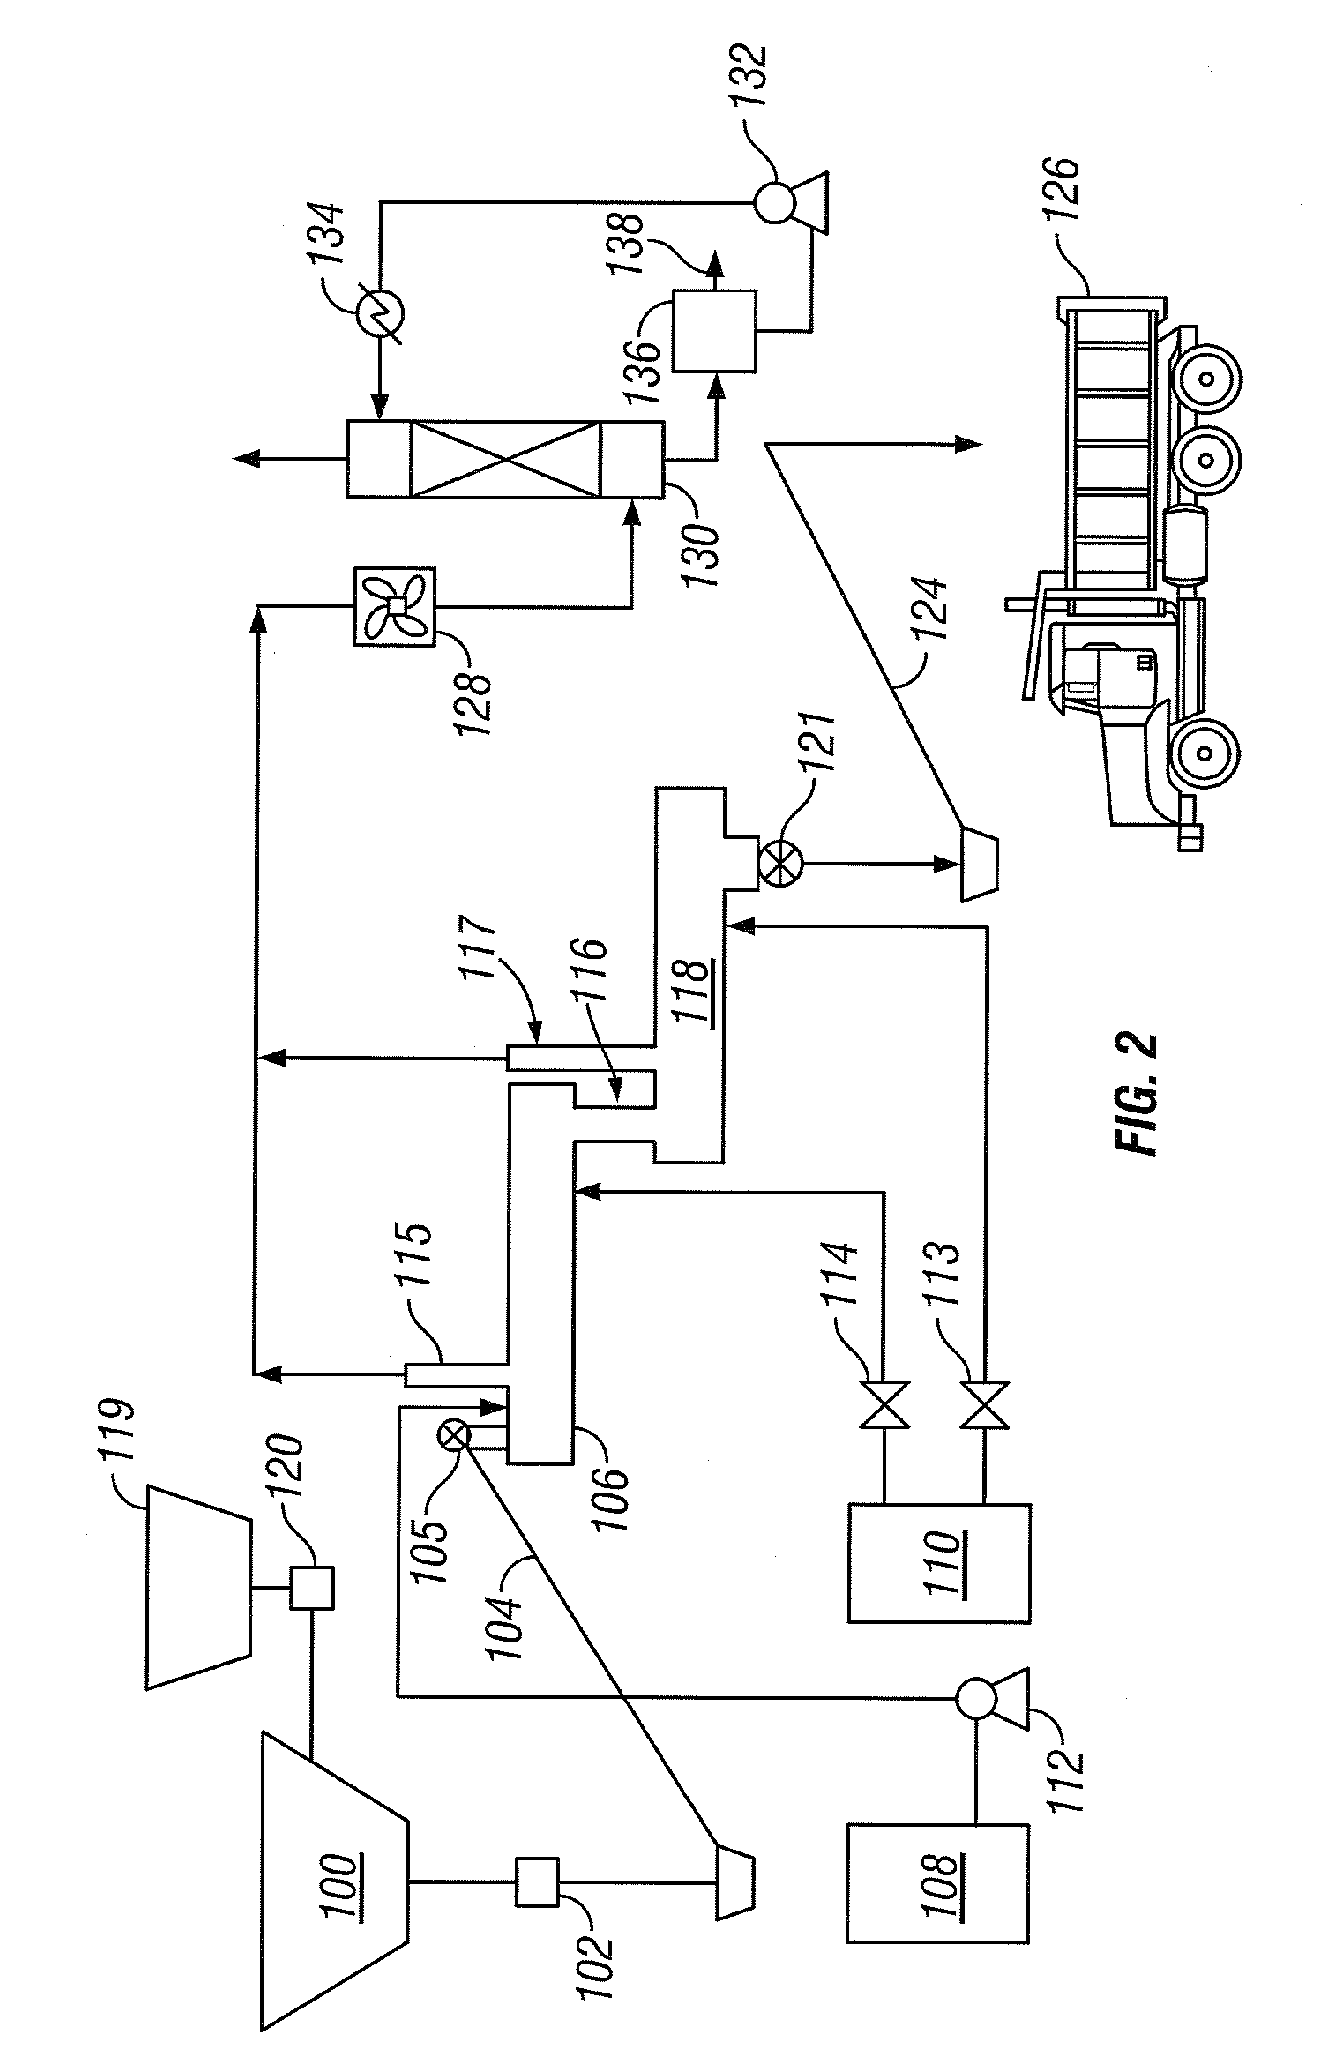 Oil contaminated substrate treatment method and apparatus